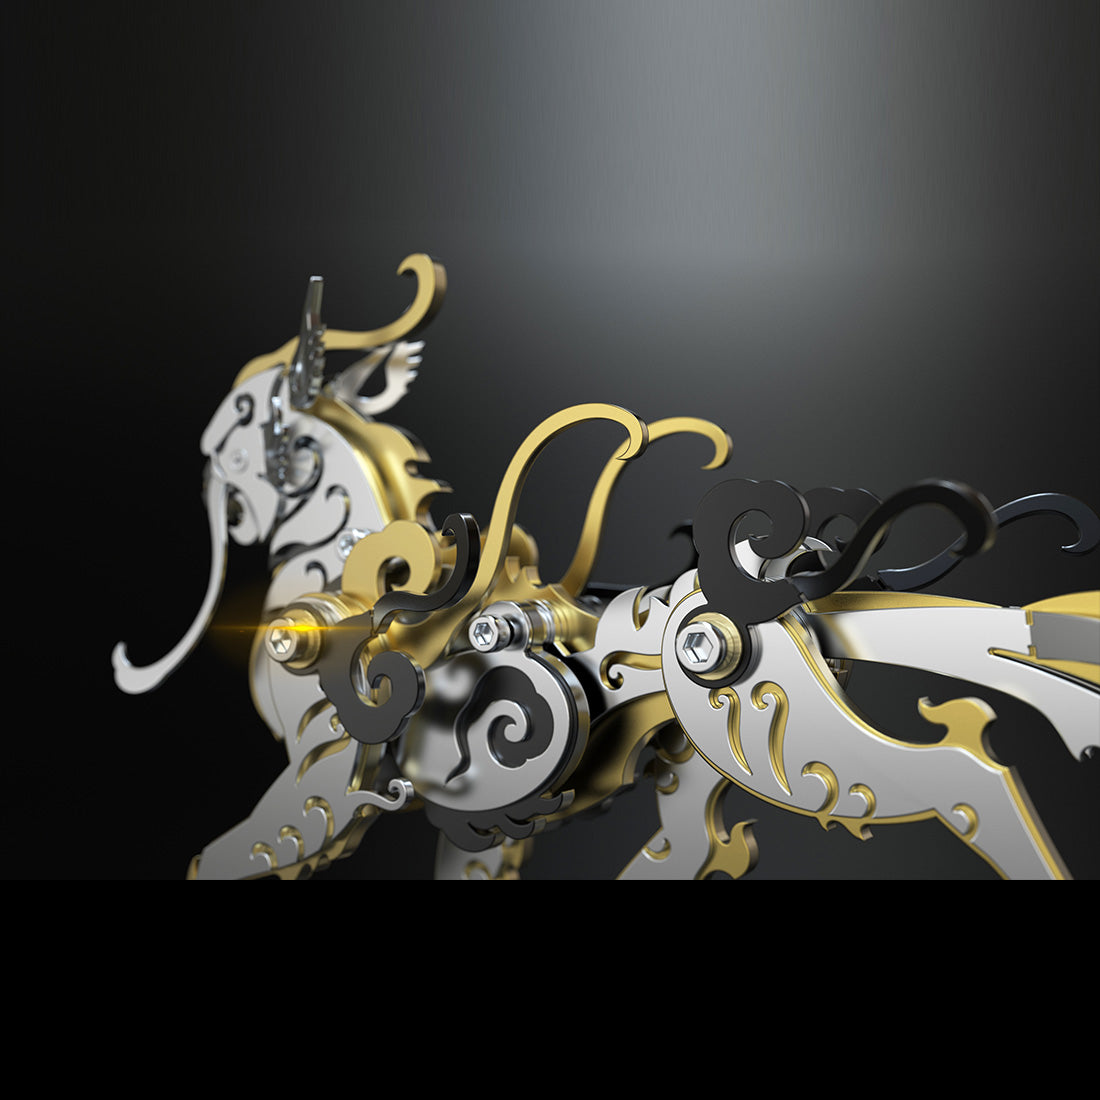 DIY Assembly Ancient Chinese Tiger Beasts 3D Metal Model Kits Toy